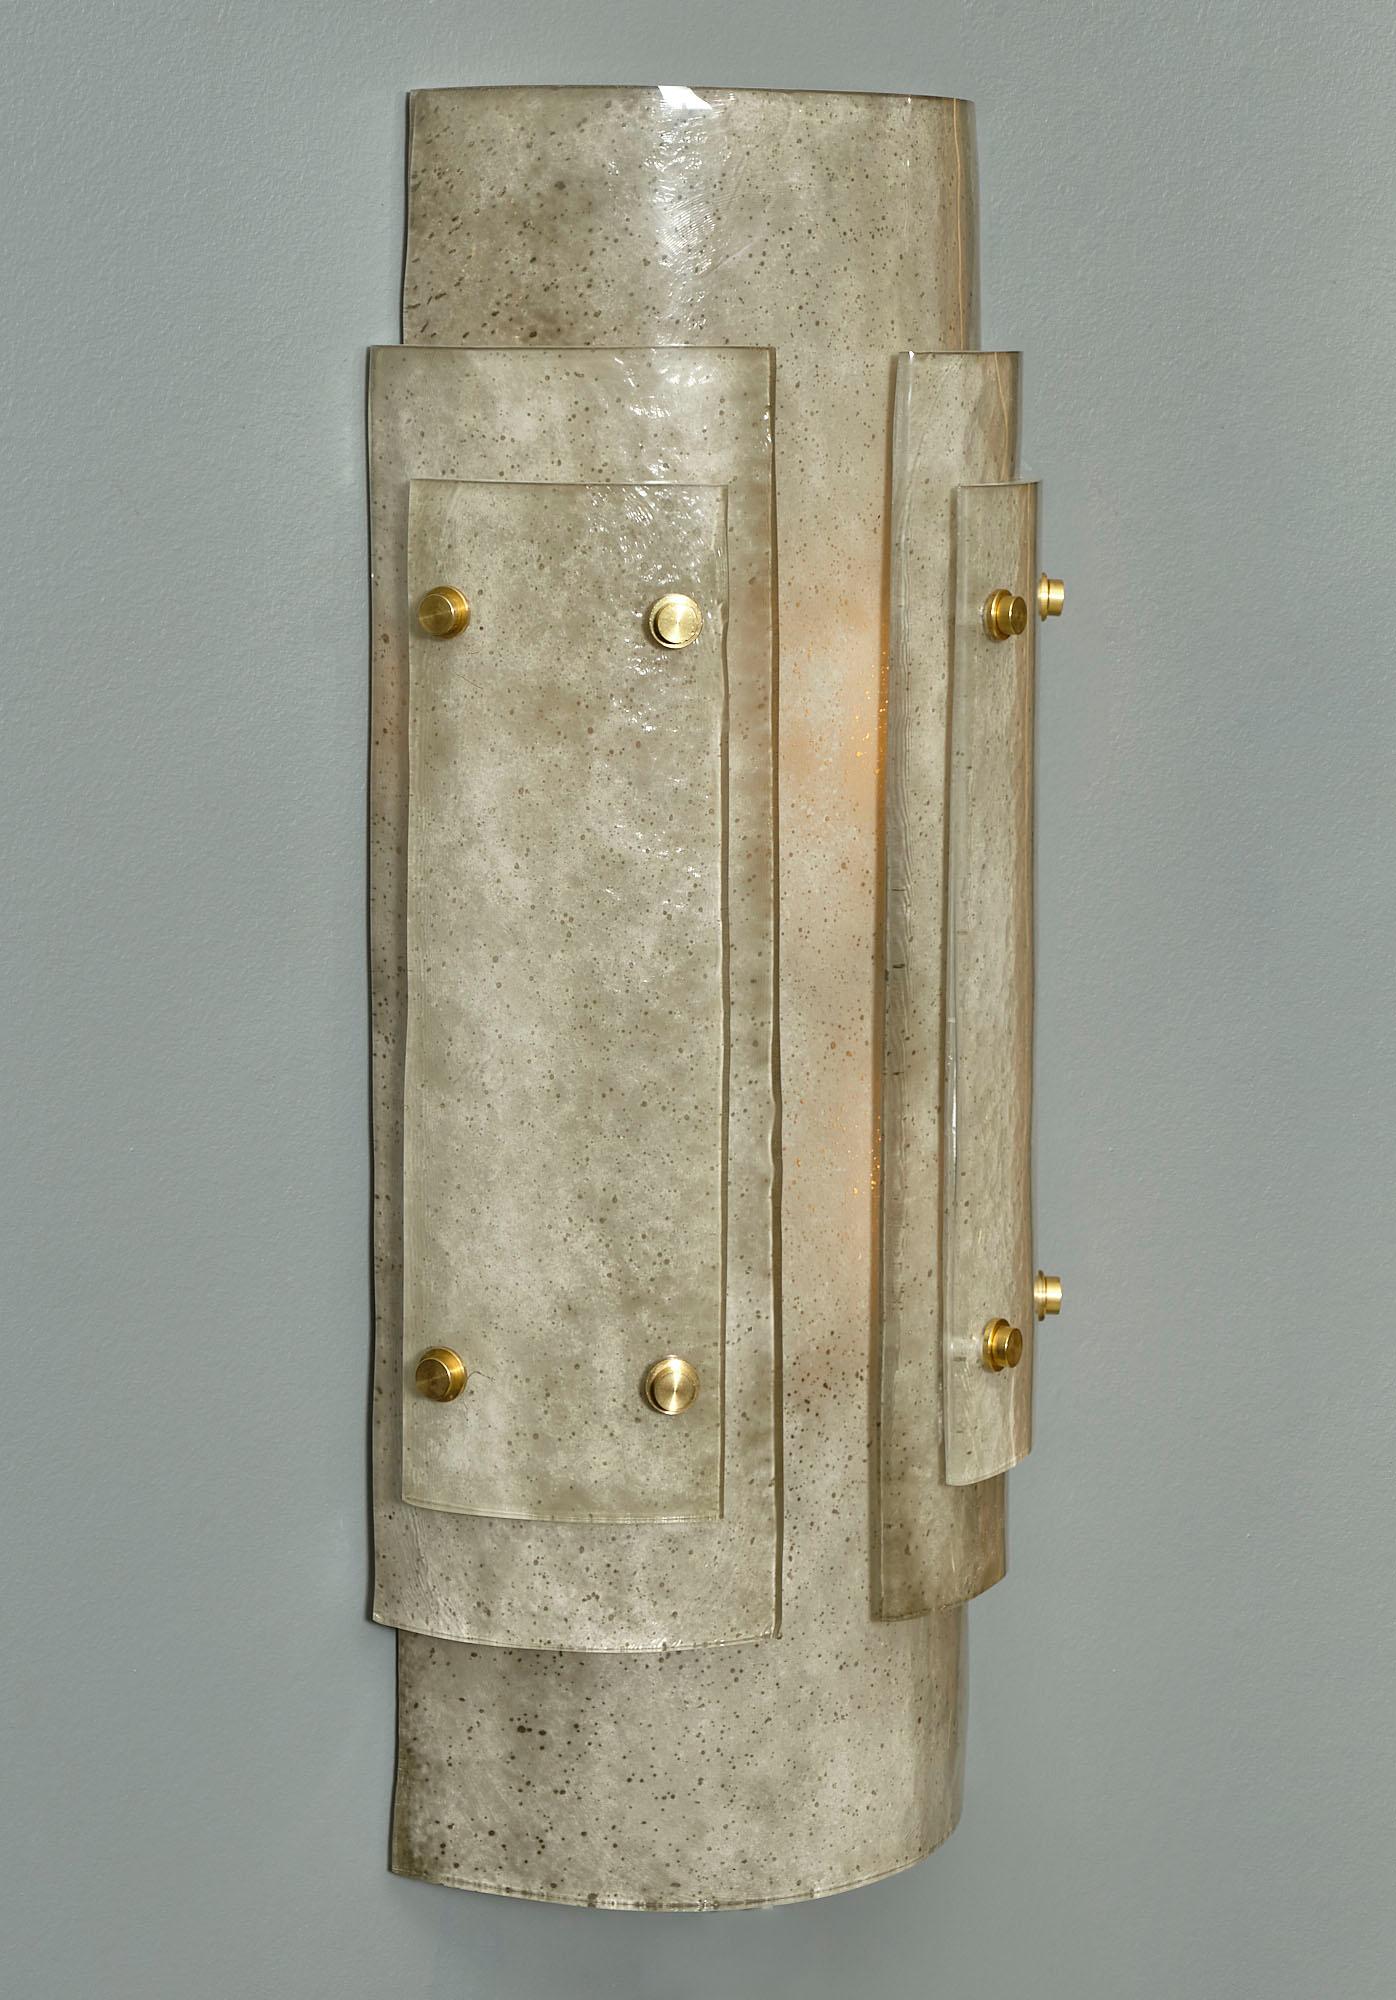 Pair of Art Deco gray Murano glass sconces from Italy. These sconces feature three thick speckled gray glass layers smoked and textured; overlapping on a solid brass structure. A superb set of lights creating a very high style decorative impact.